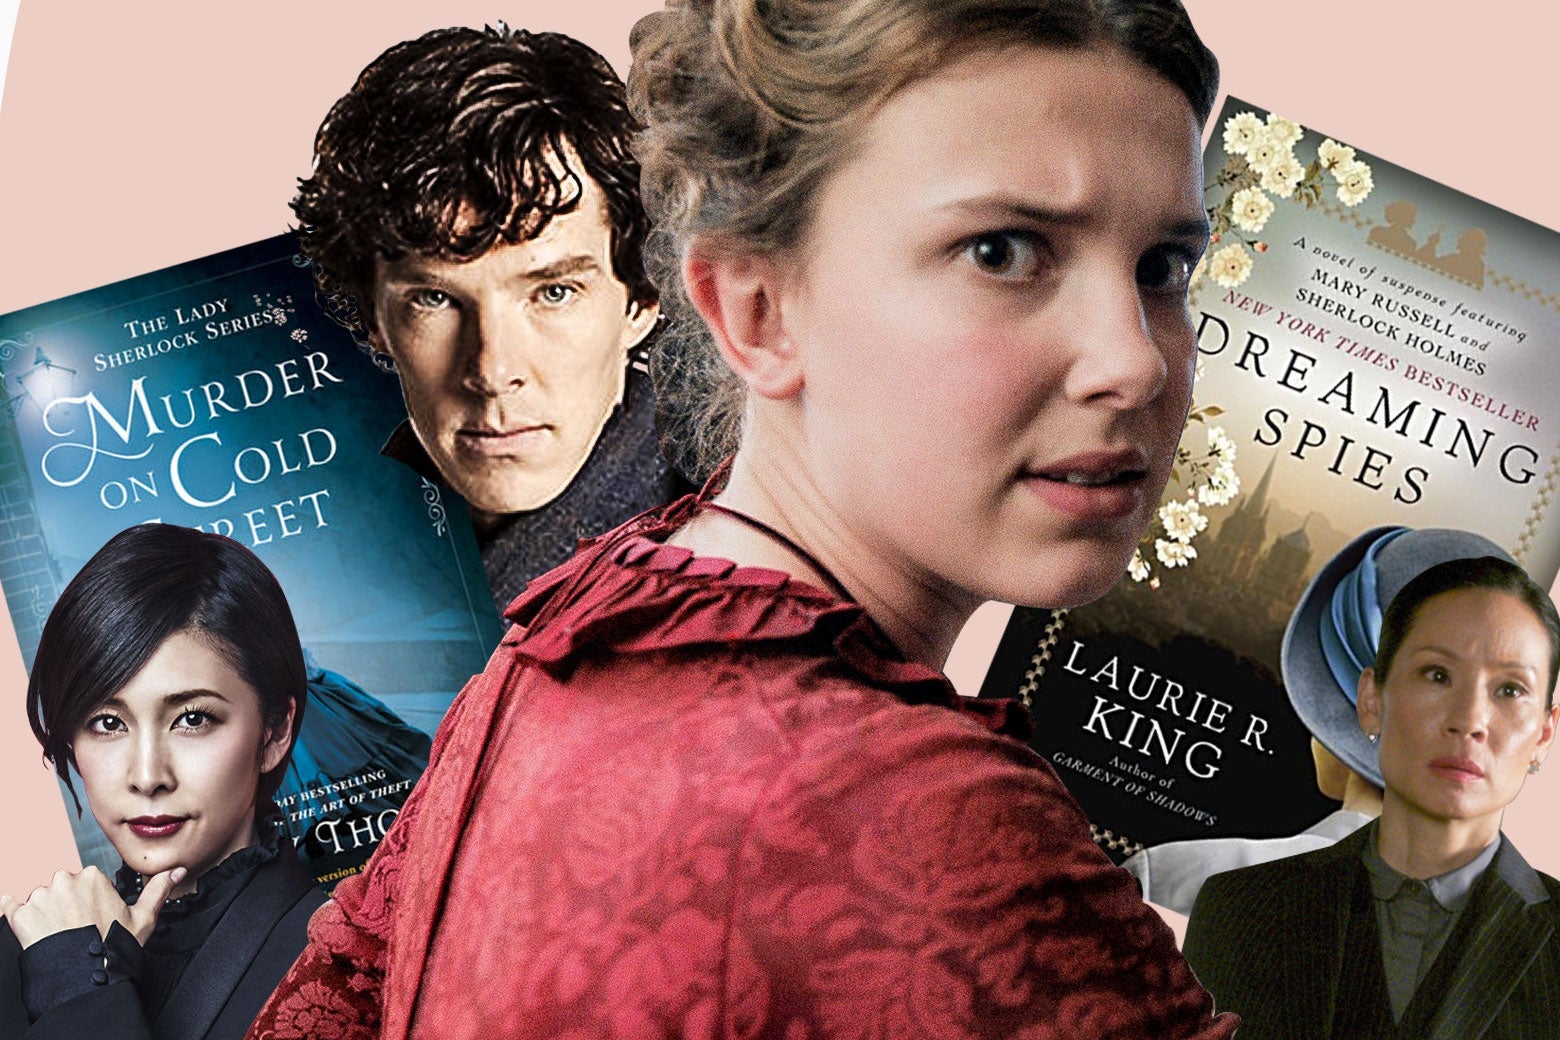 Collage of Millie Bobby Brown in Enola Holmes, Benedict Cumberbatch in Sherlock, Lucy Liu in Elementary, Yūko Takeuchi in Miss Sherlock, and the book covers of Murder on Cold Street and Dreaming Spies